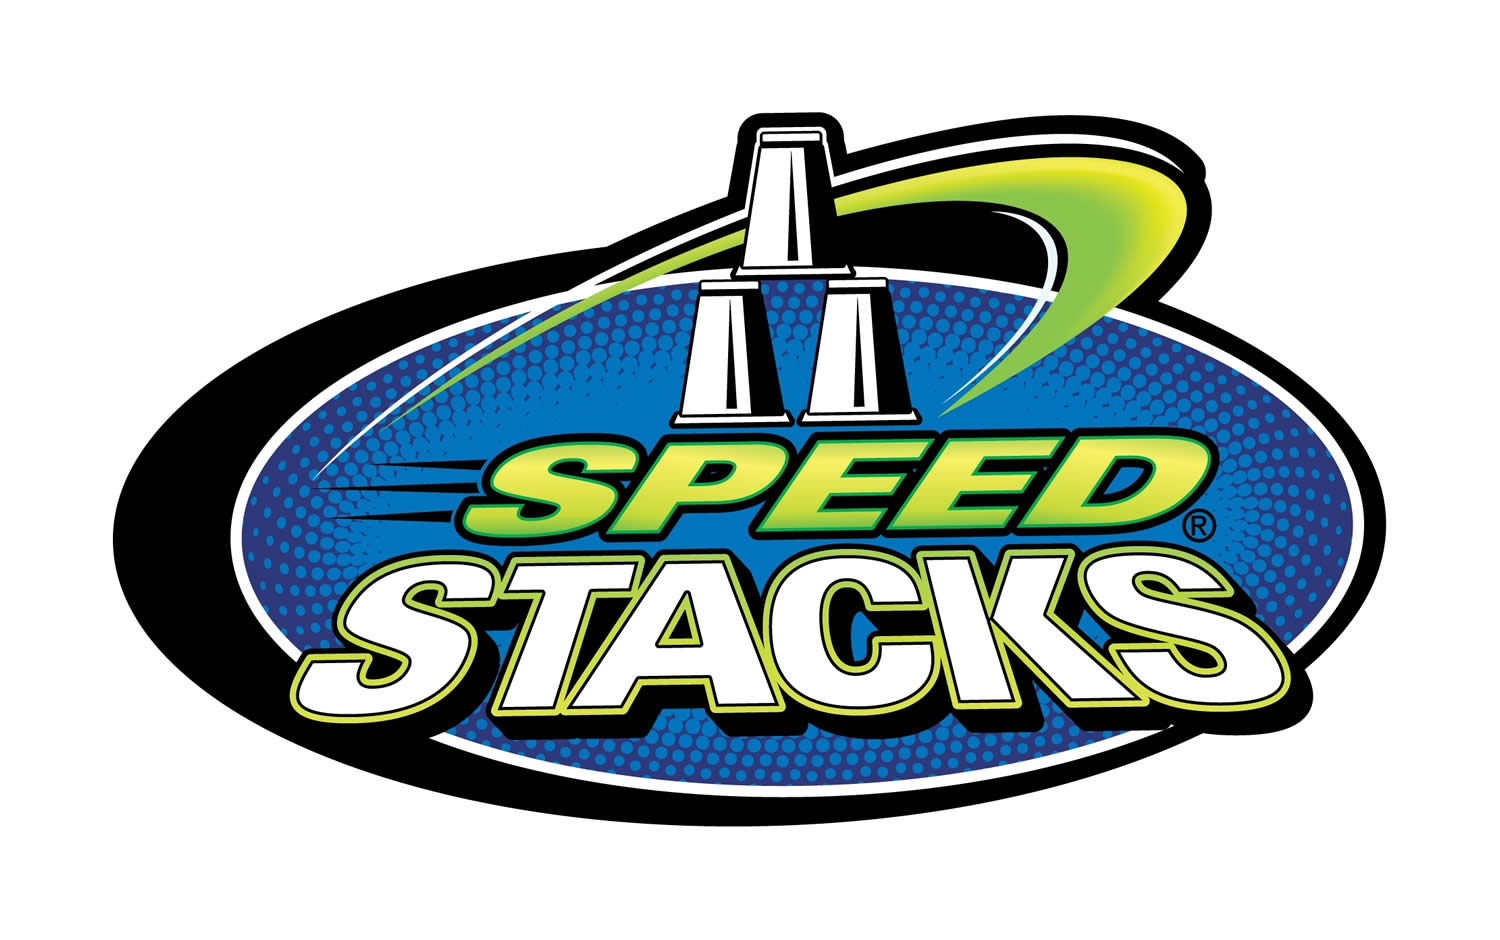 Speed Stacks Other Items in Sports & Outdoors